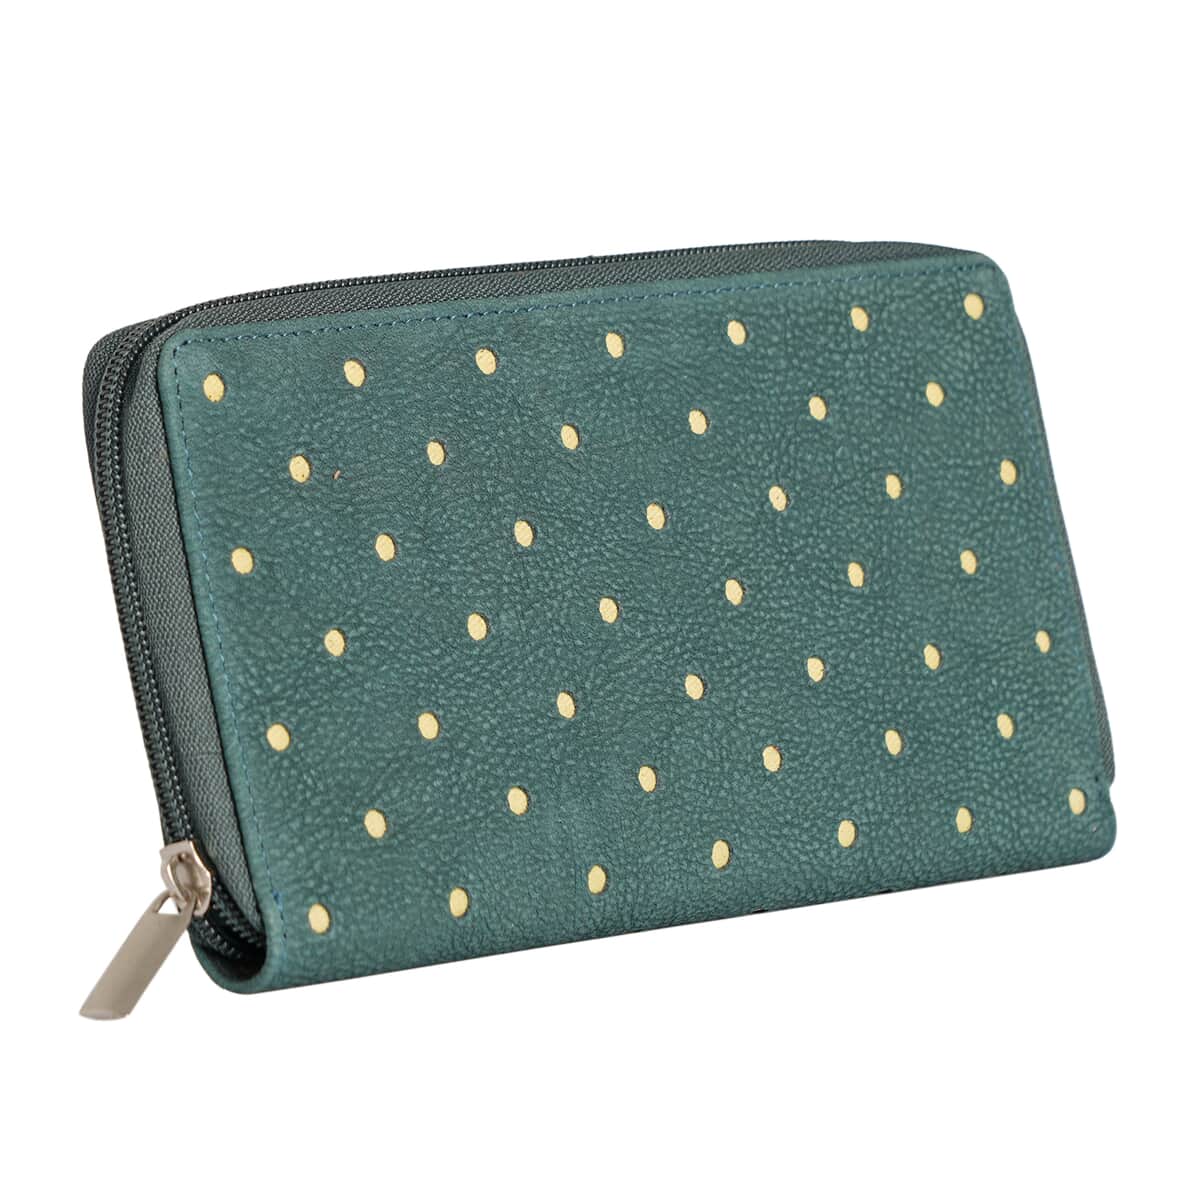 Union Code Petrol Blue Polka Dots Print Genuine Leather RFID Women's Wallet image number 4